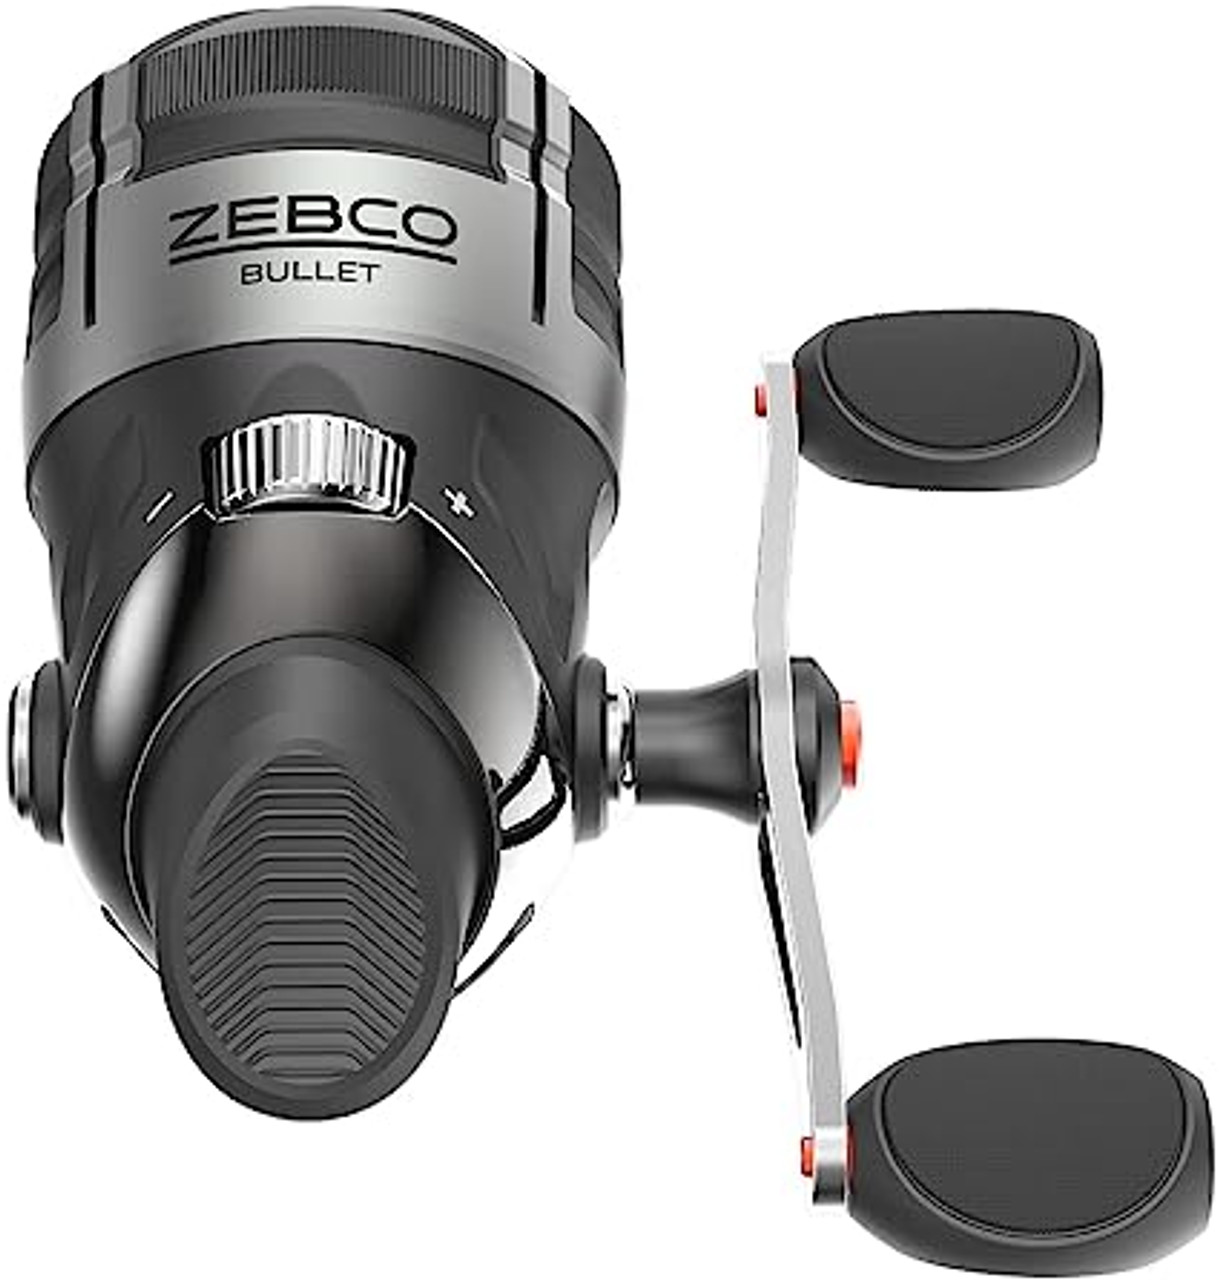 Zebco Bullet Spincast Reel, Size 30 Pre-Spooled with 10-Pound Zebco Fishing  Line